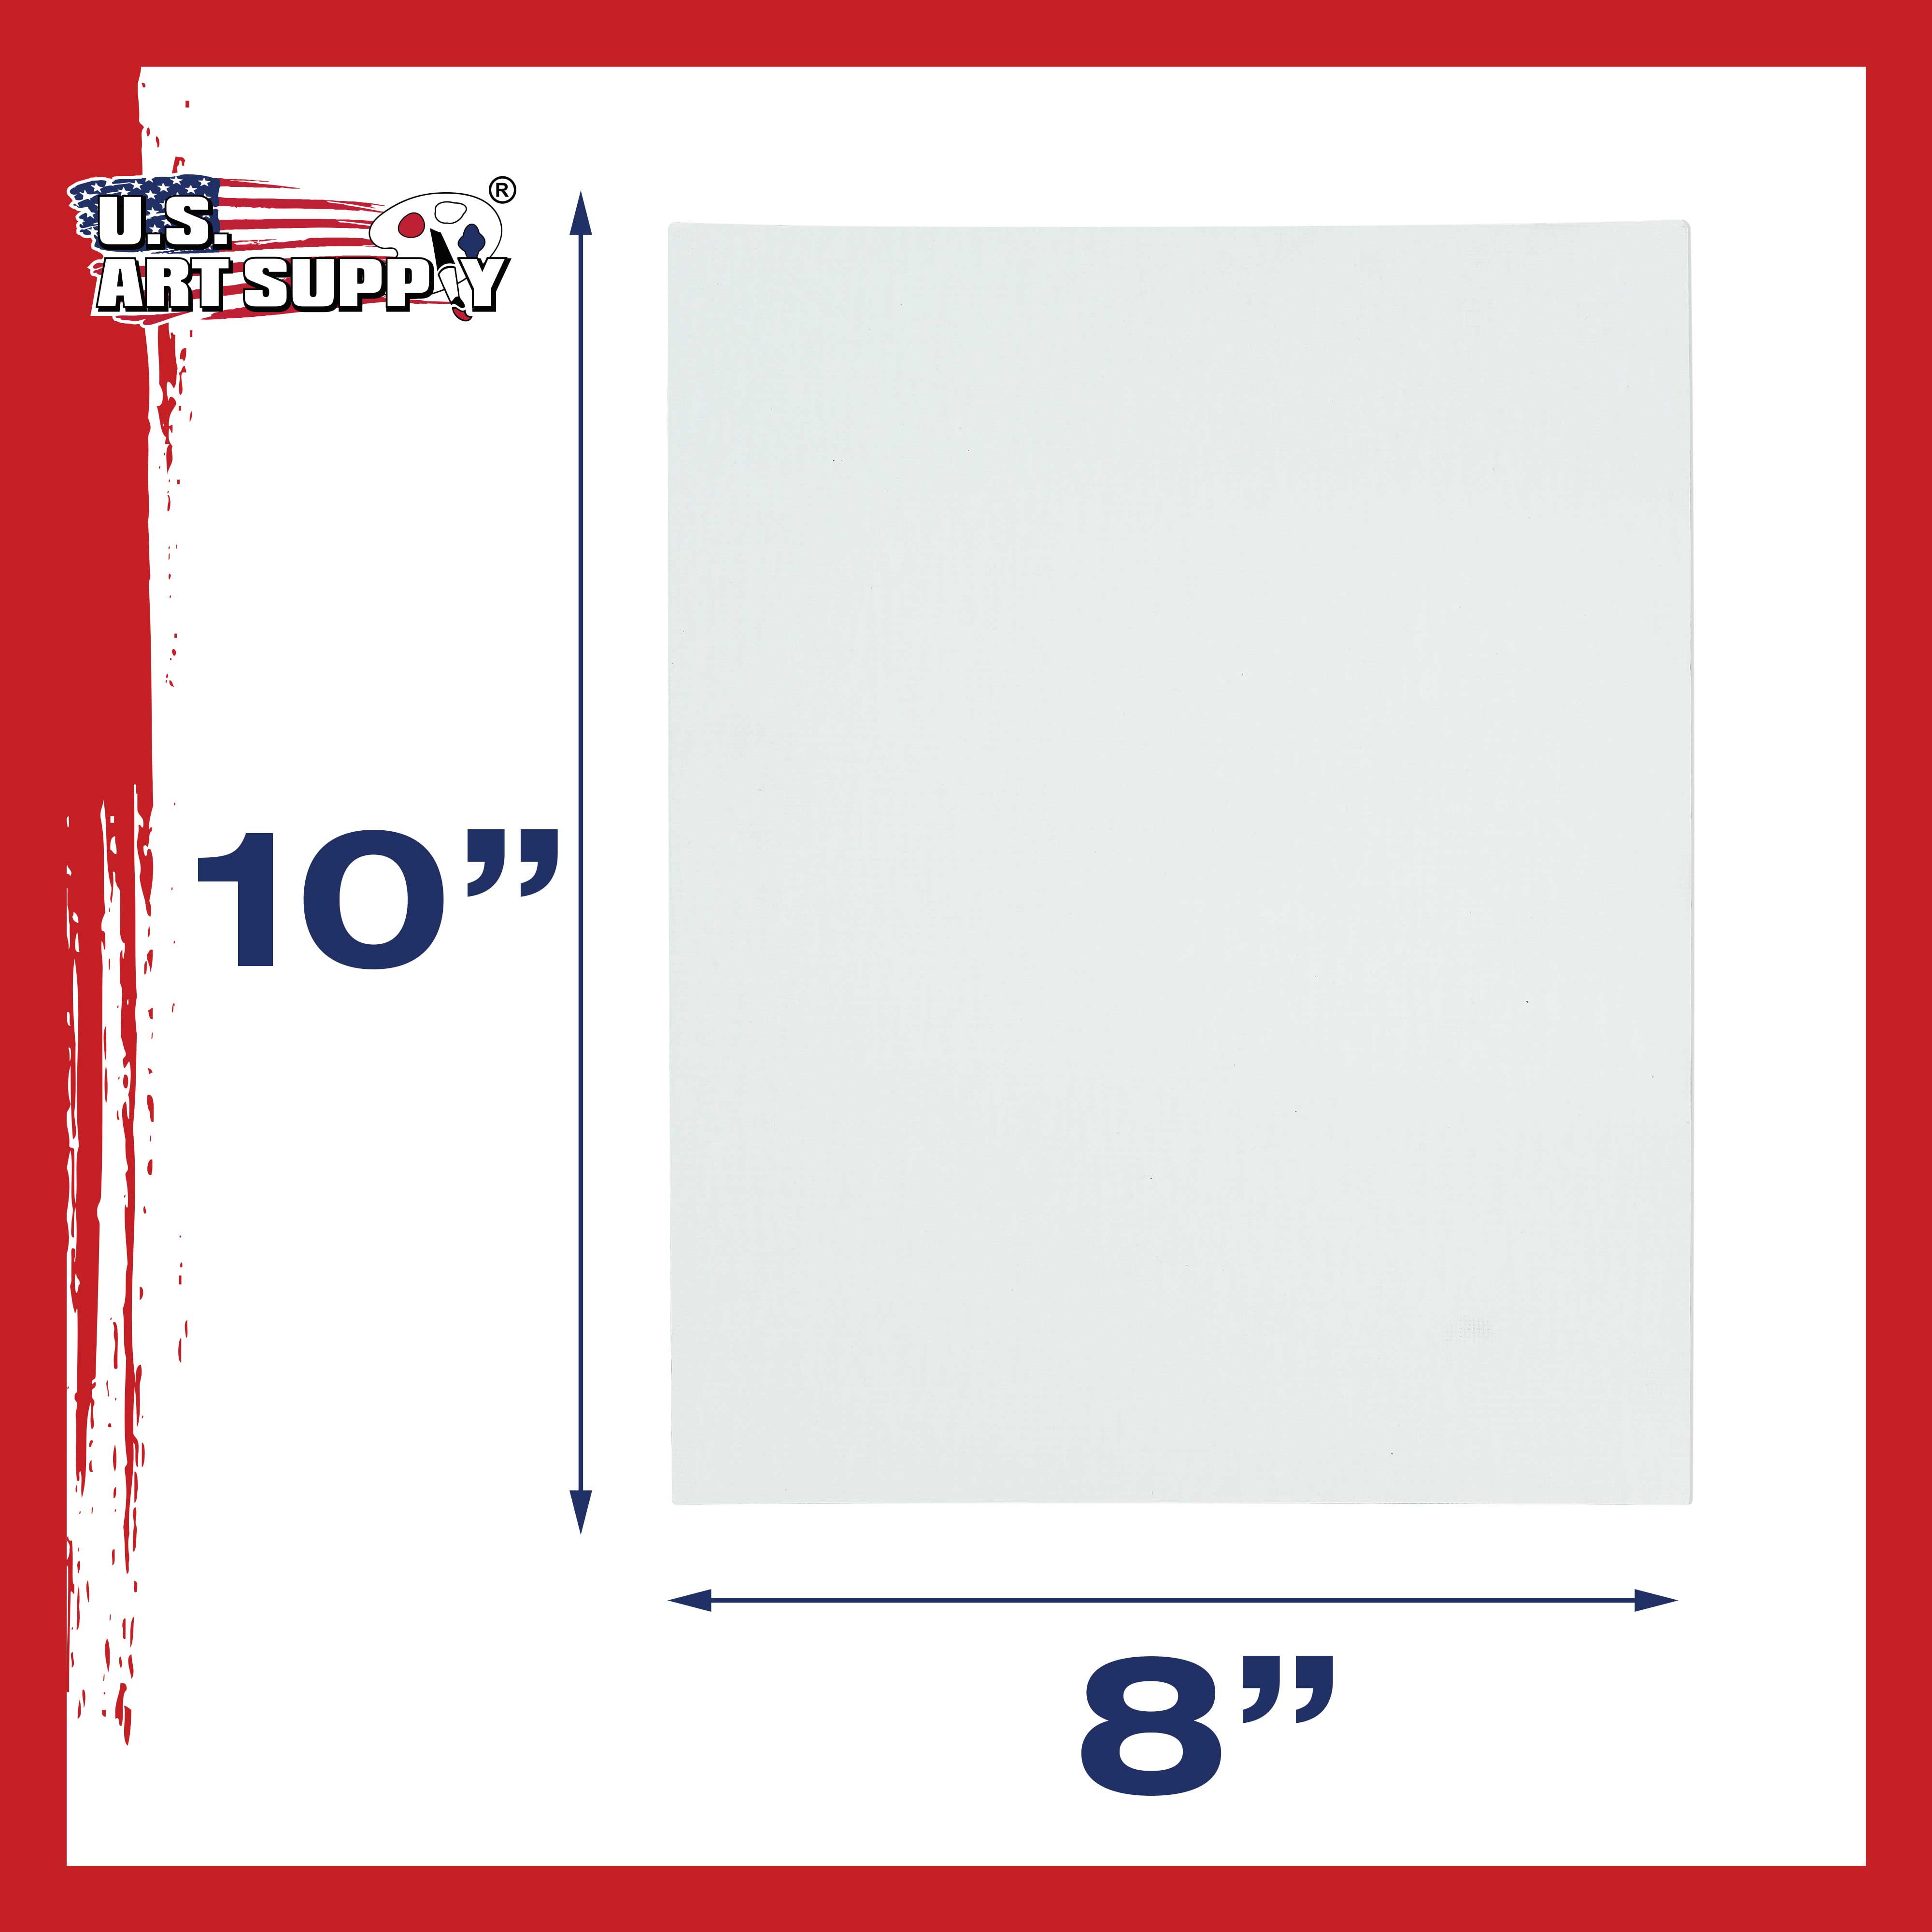 1 Full Case of 6 Single Canvas Panels US Art Supply 8 X 10 inch Black Professional Artist Quality Acid Free Canvas Panels 6-Pack 